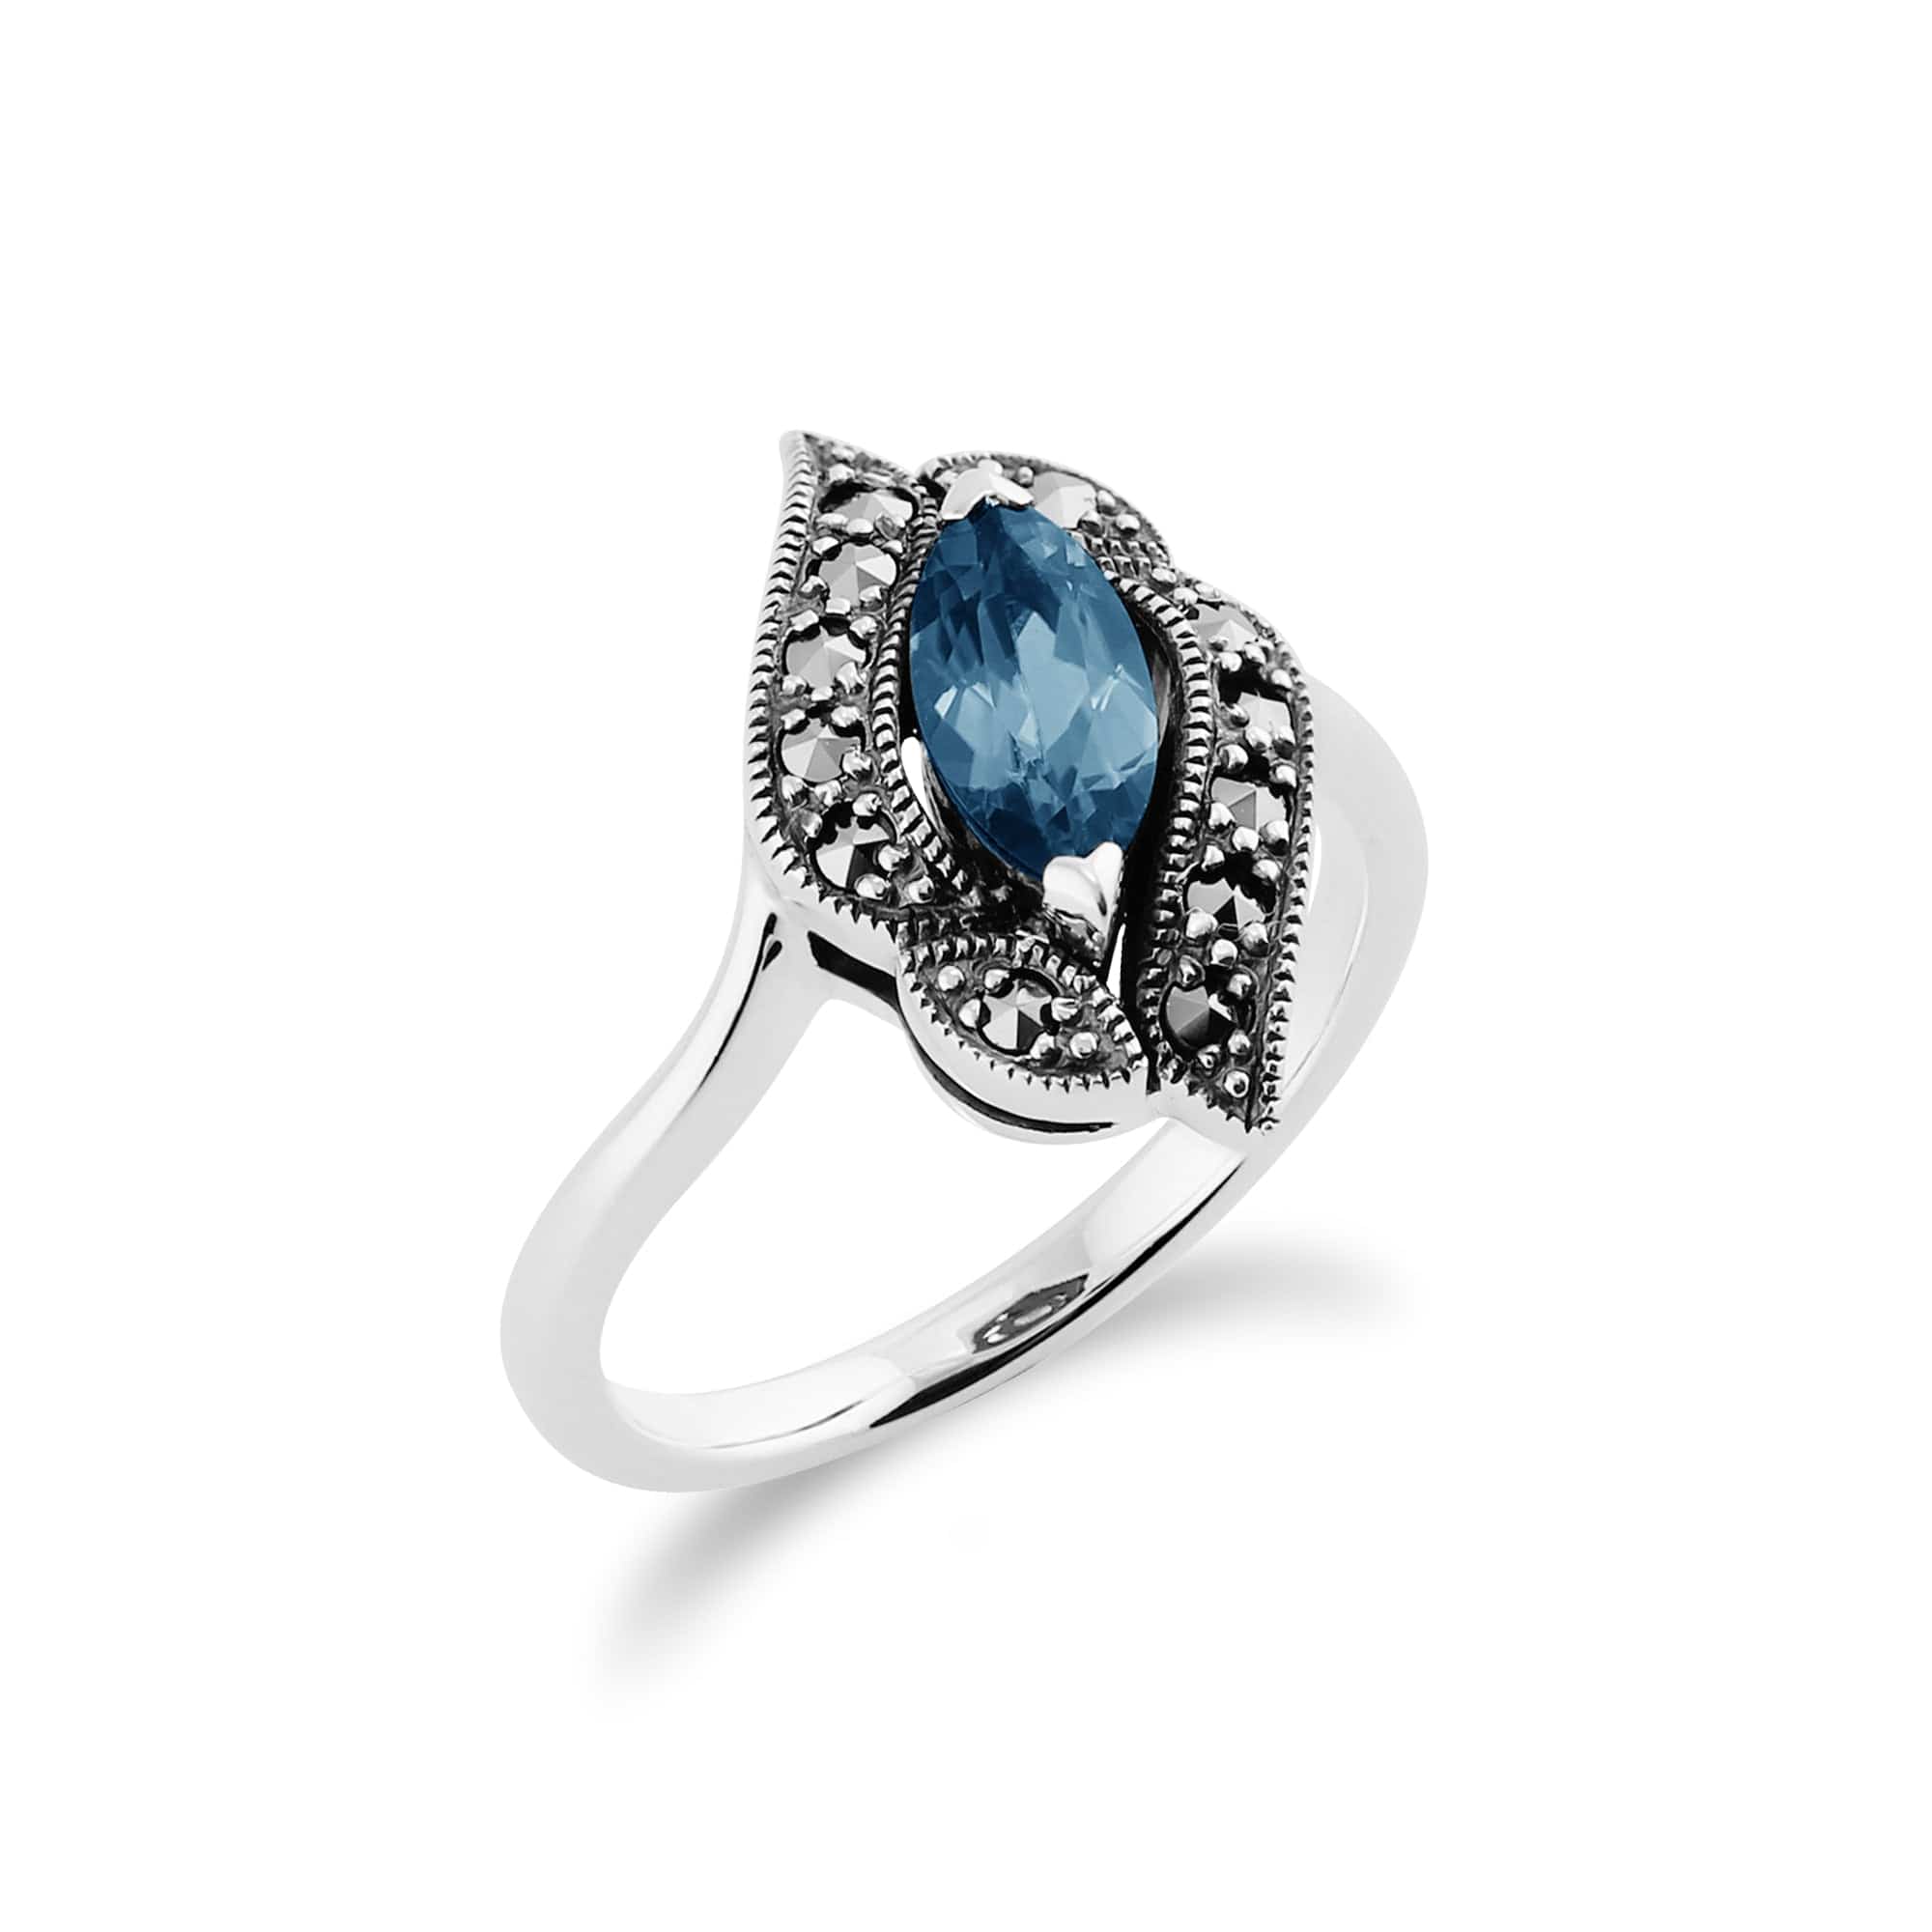 Art Nouveau Style Marquise Blue Topaz & Marcasite Ring in 925 Sterling Silver - Gemondo